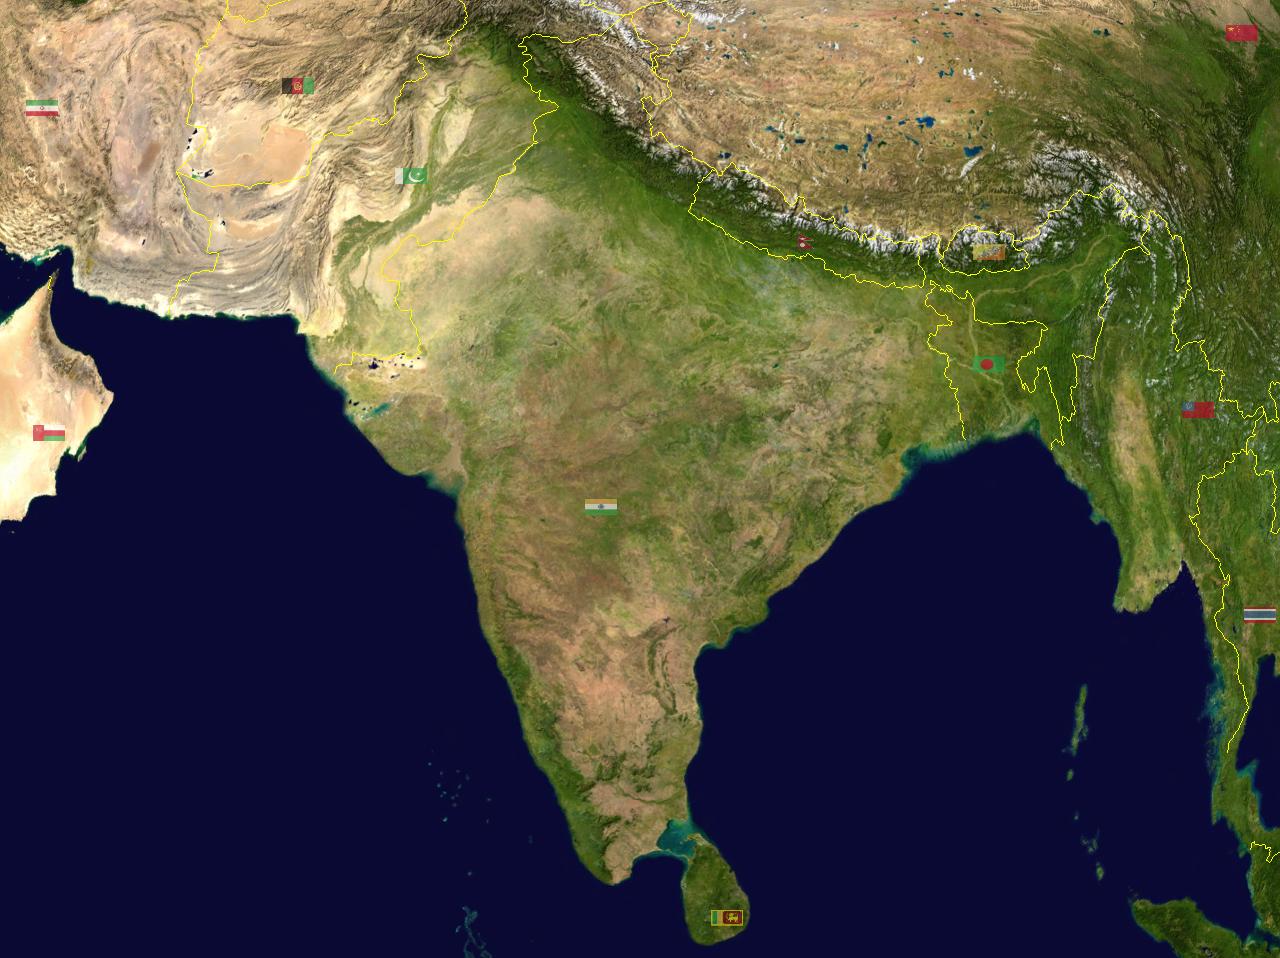 Indian Non-Alignment in the 21st Century